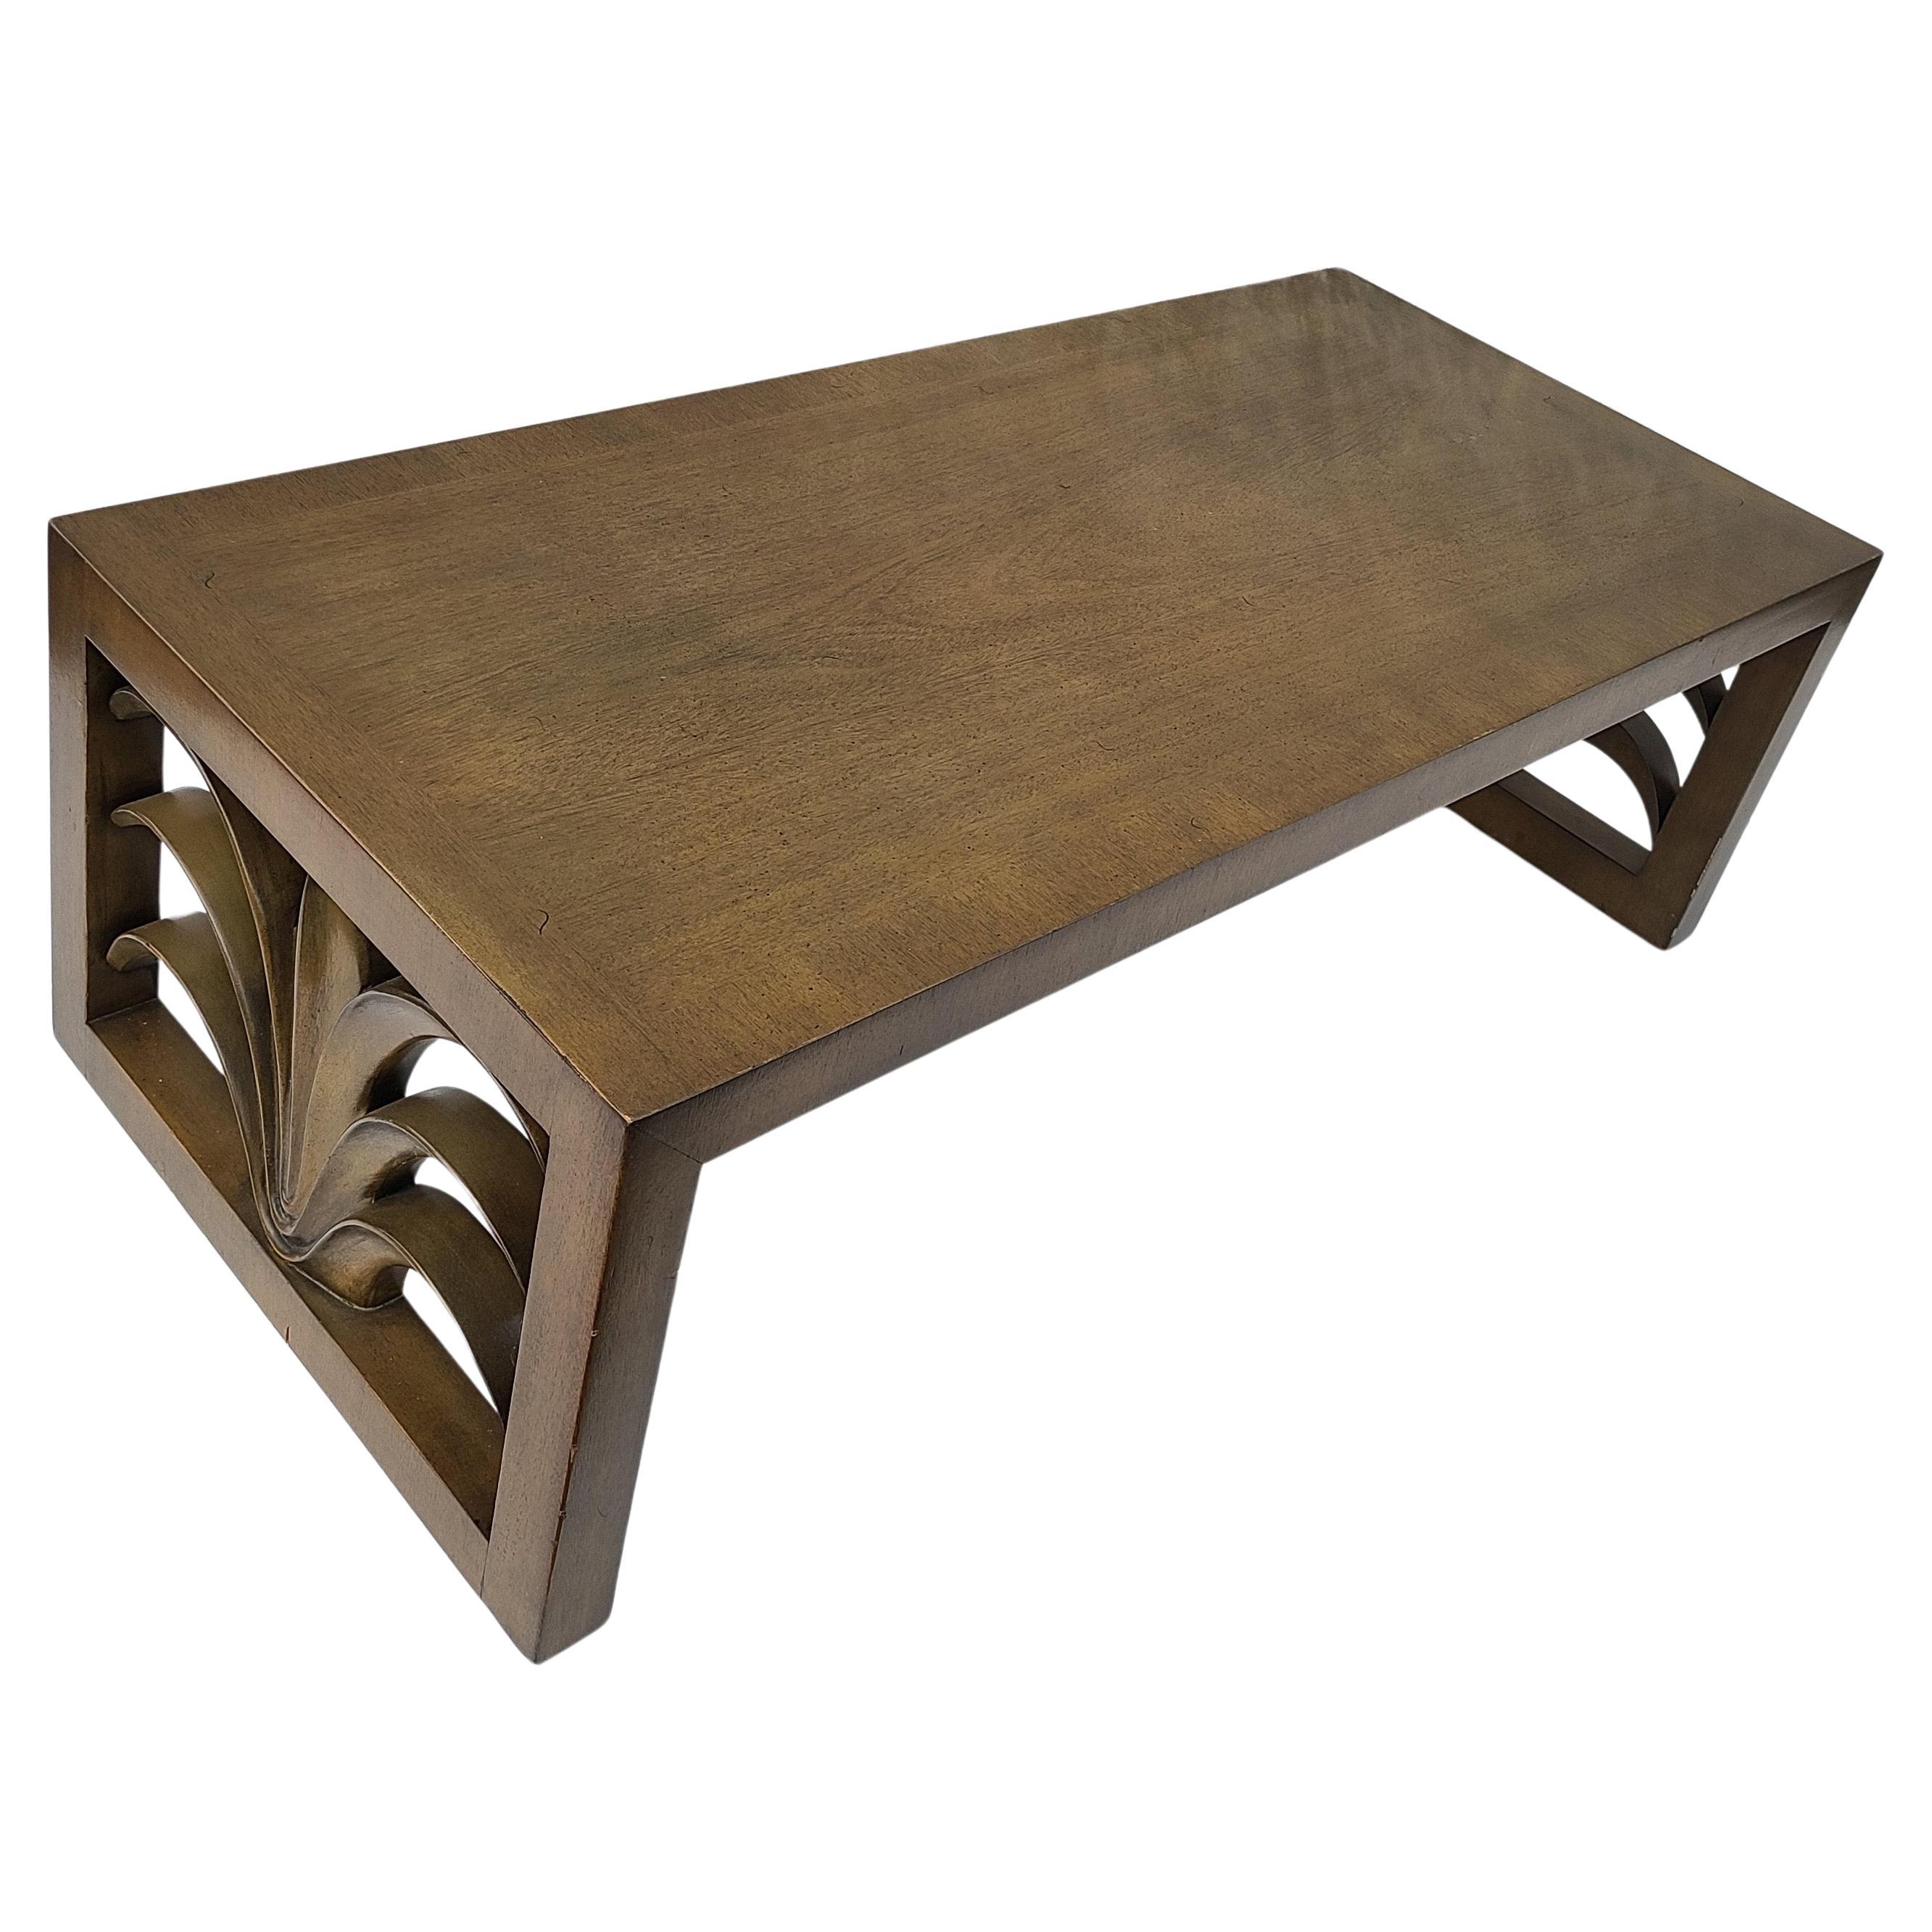 Please message us for a cost effective shipping quote to your location.

Mid-Century Modern Coffee Table made by Widdicomb Furniture Company.
This form has been shown by T. H. Robsjohn-Gibbings in many of his own installations created by his